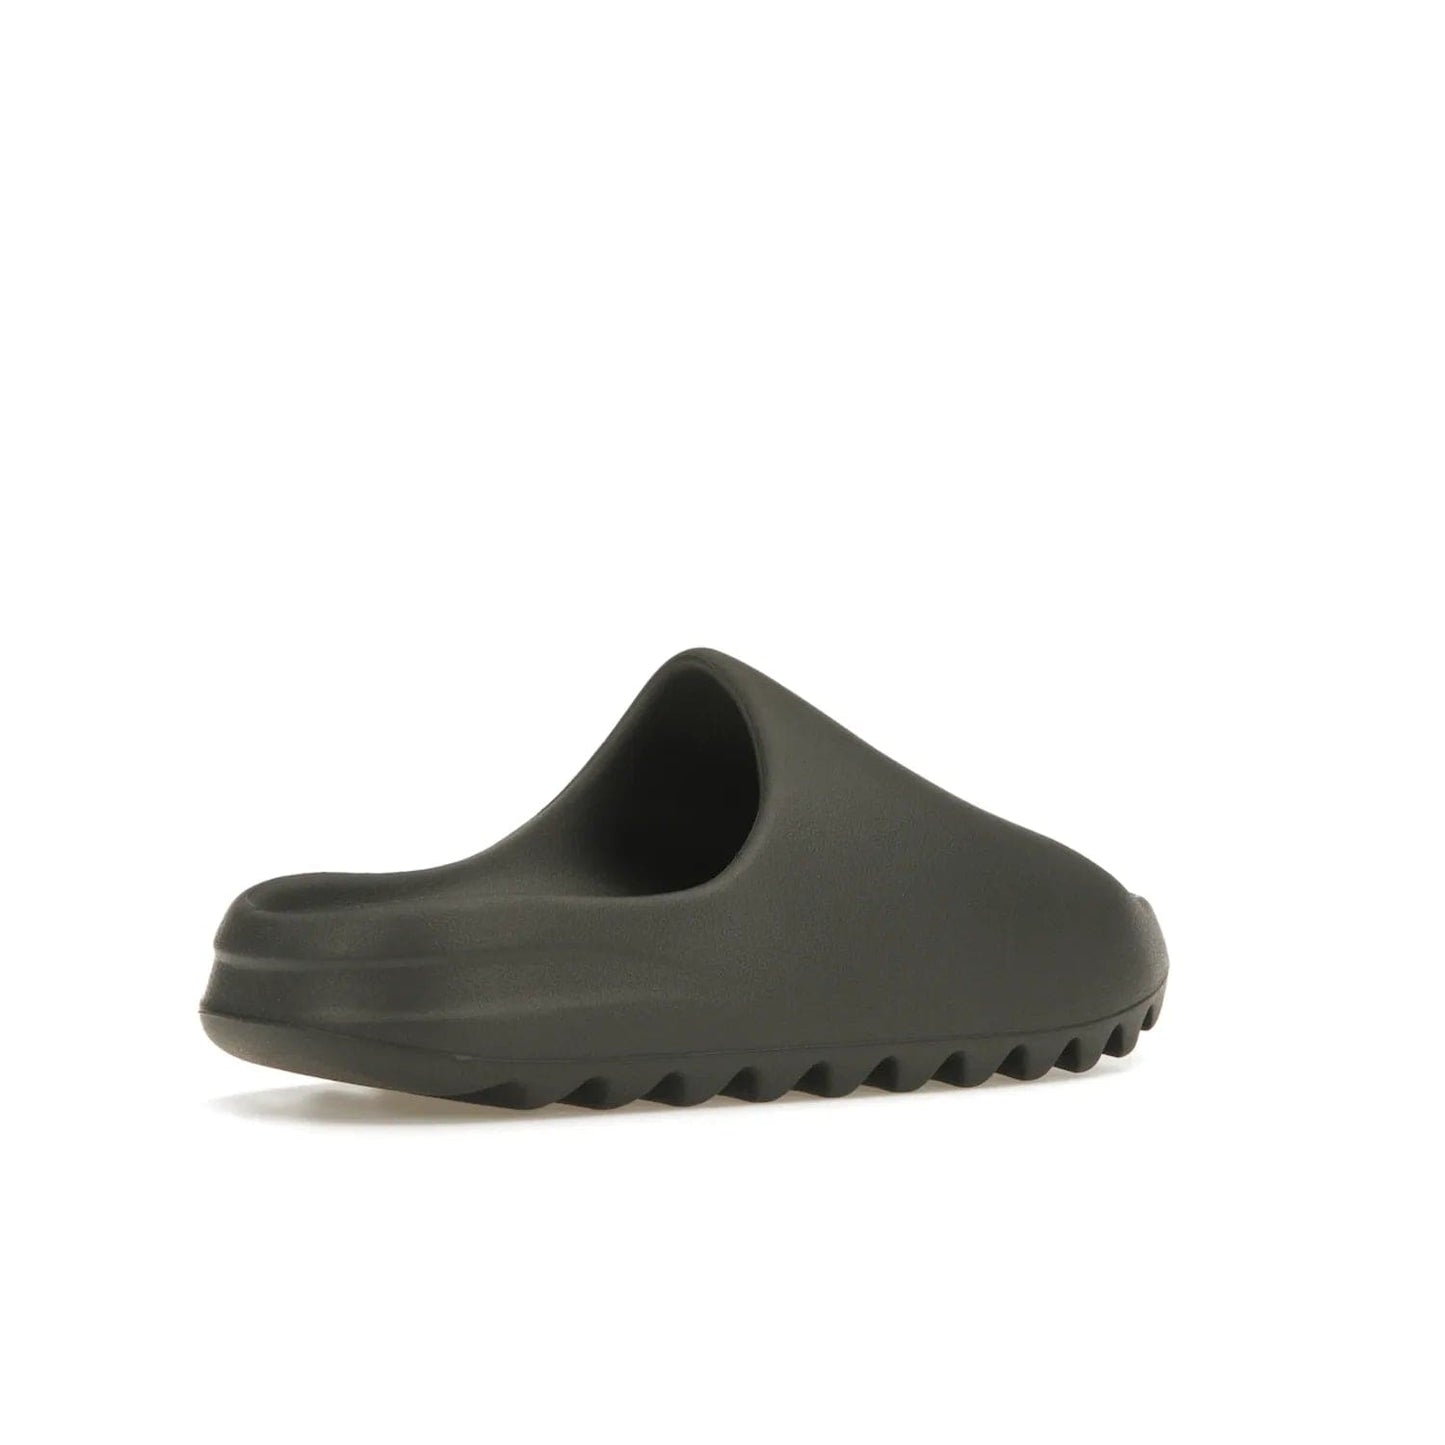 adidas Yeezy Slide Granite - Image 33 - Only at www.BallersClubKickz.com - Introducing the adidas Yeezy Slide Granite with a sleek, soft-to-touch one-piece upper – perfect for making a statement with its minimalistic design and luxurious comfort. Get yours now for only $70.